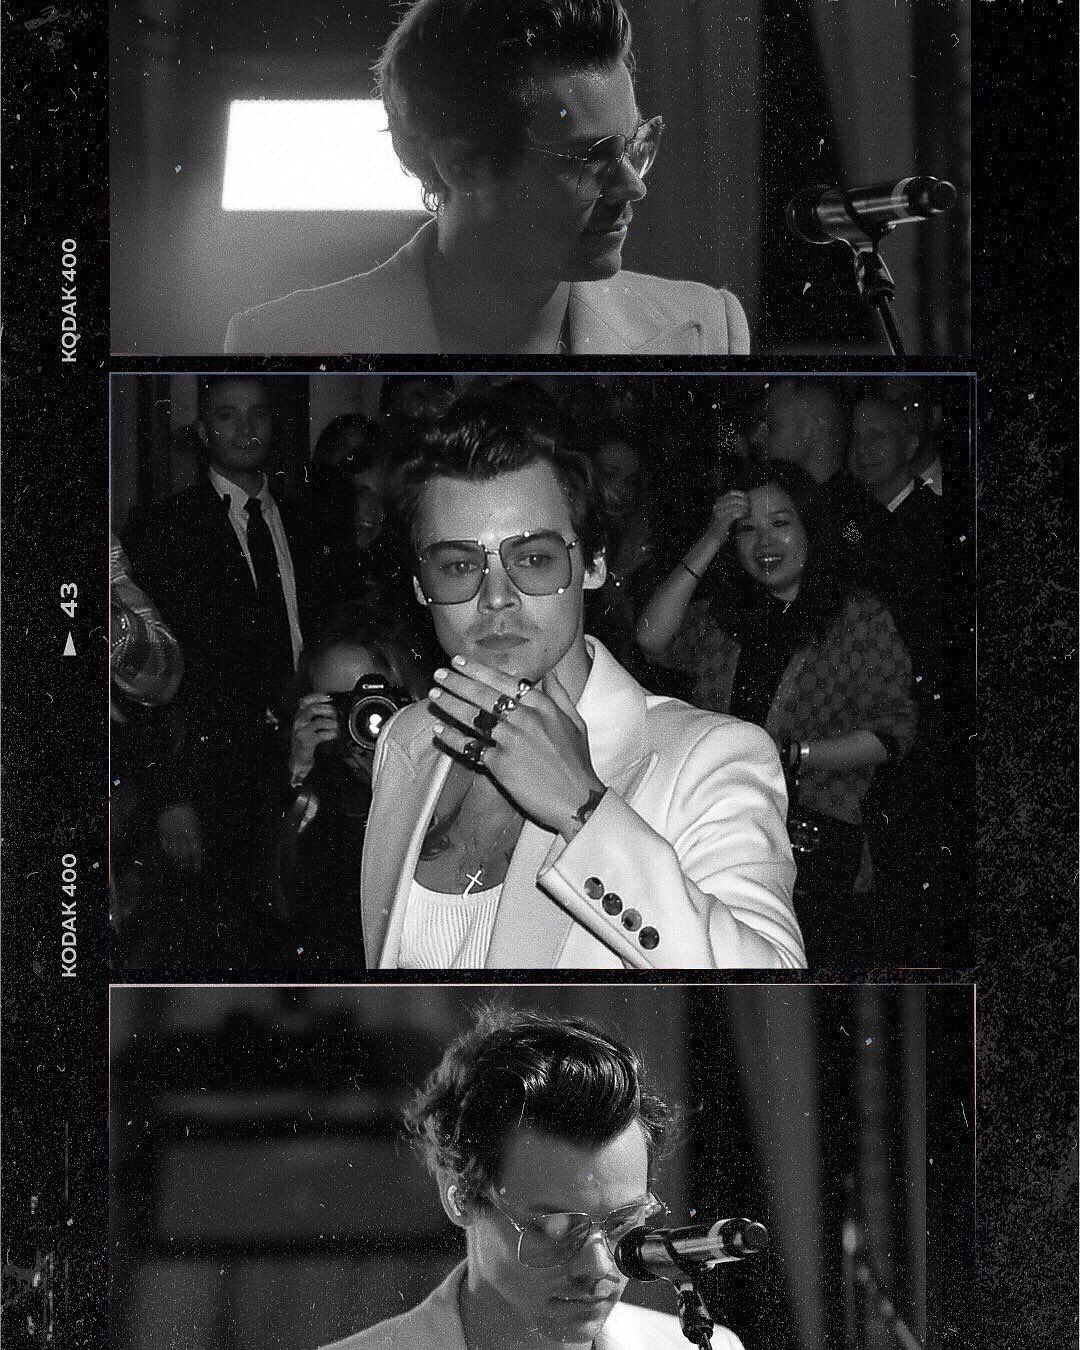 Gucci Cruise 2020 Show. Harry styles wallpaper, Harry styles, Mr